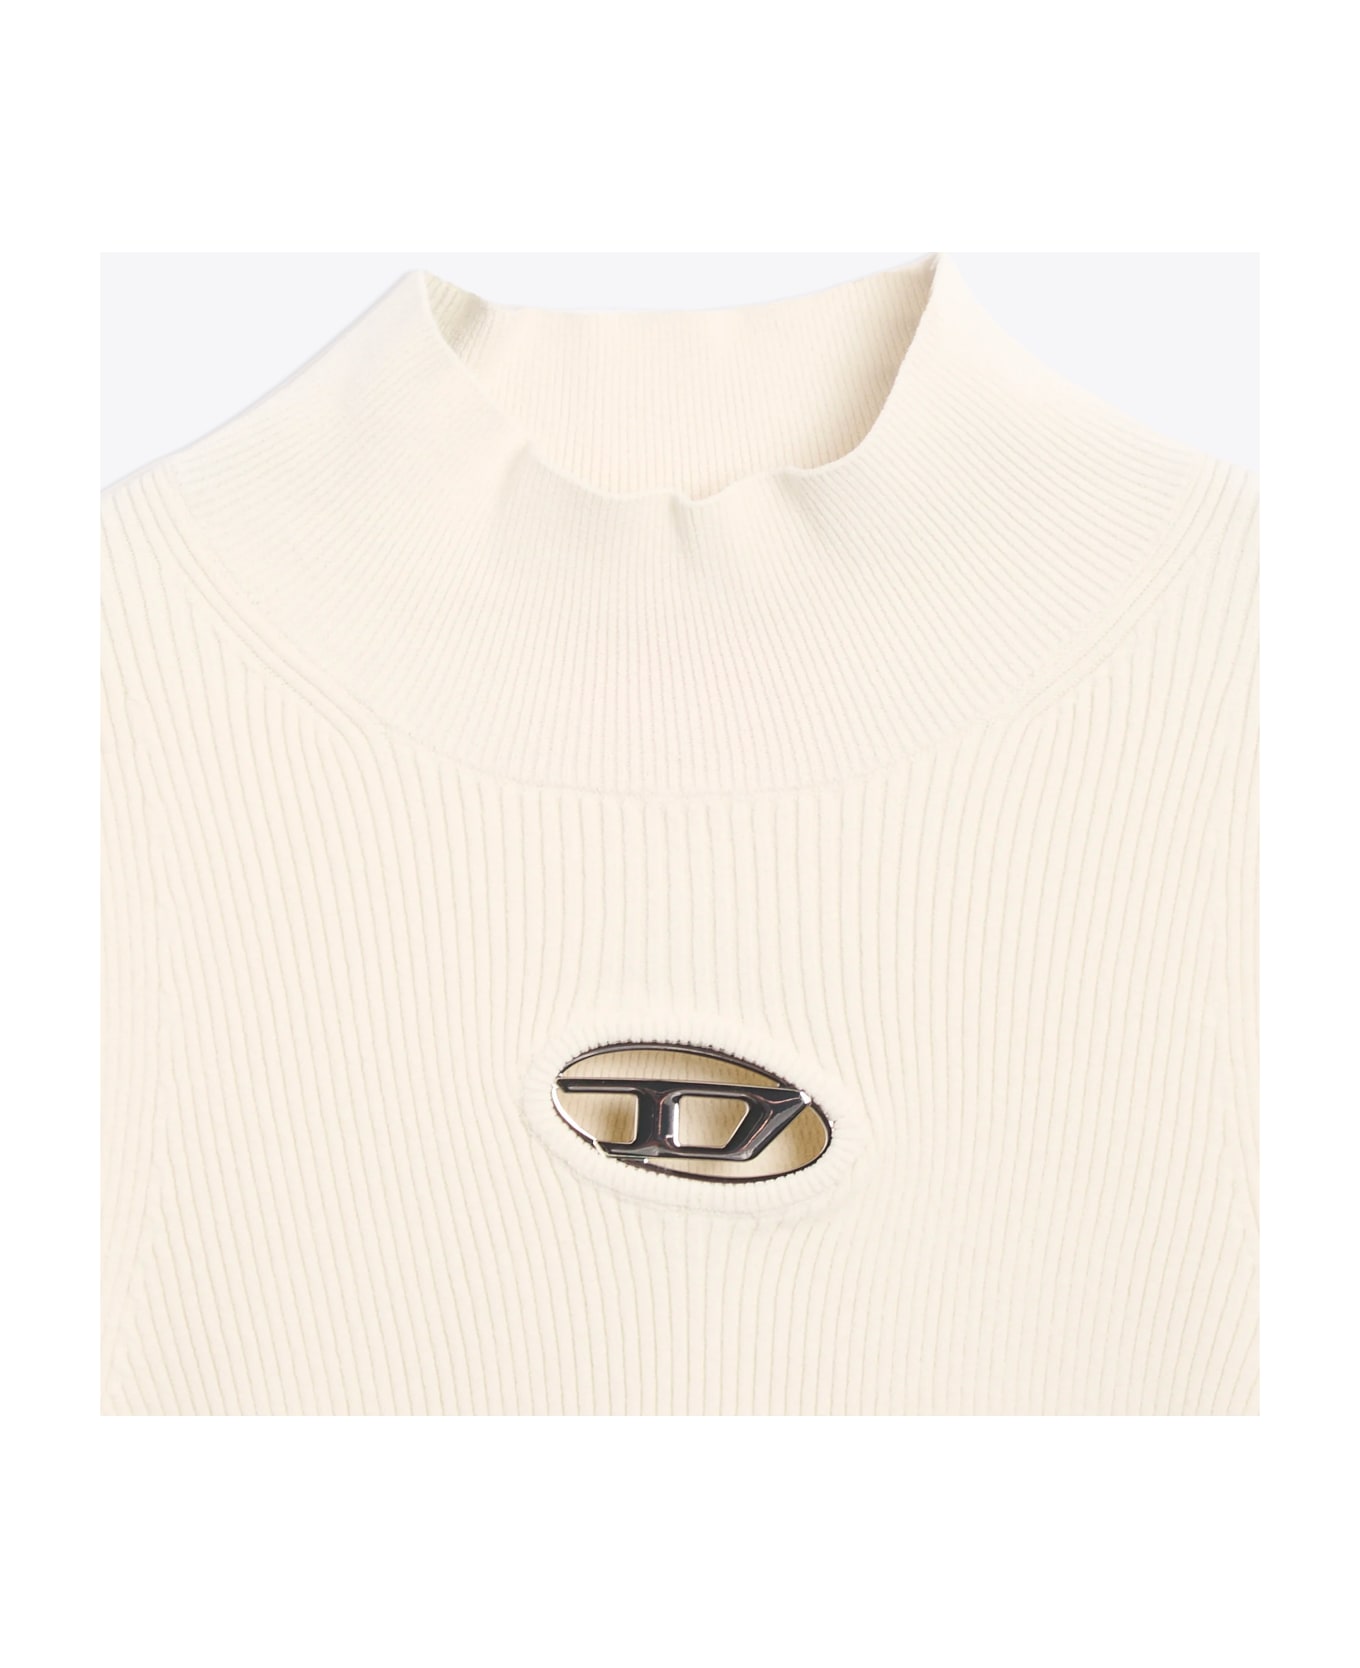 Diesel M-onervax-top Off white ribbed knit turtleneck top - M Onervax Top - Bianco